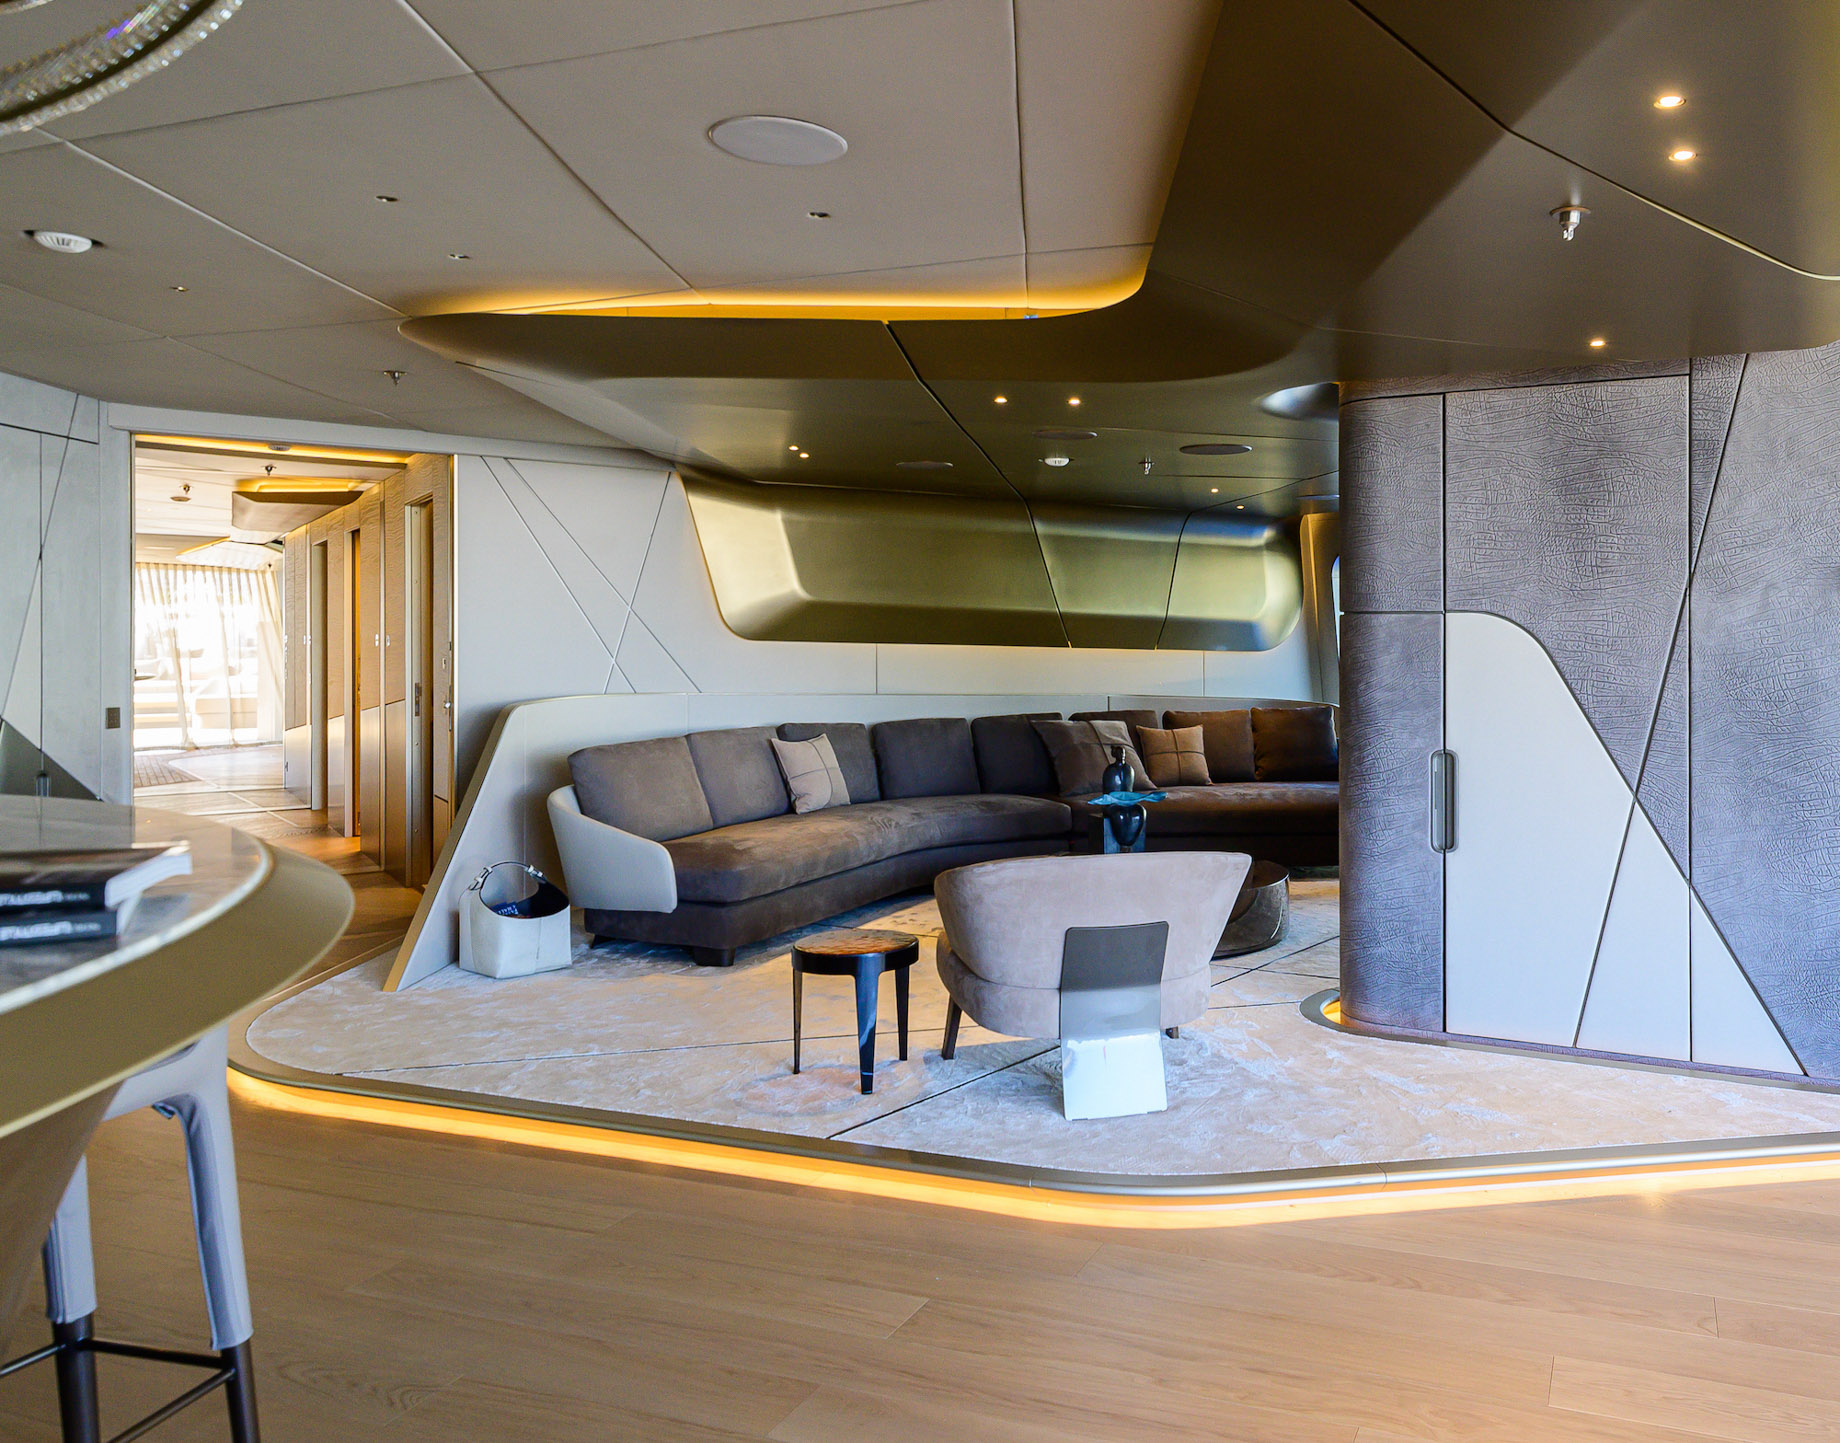 Luxury Catamarans are Increasingly Becoming the Charter Vessel of Choice – This Is It – Tecnomar – Luxury Yacht